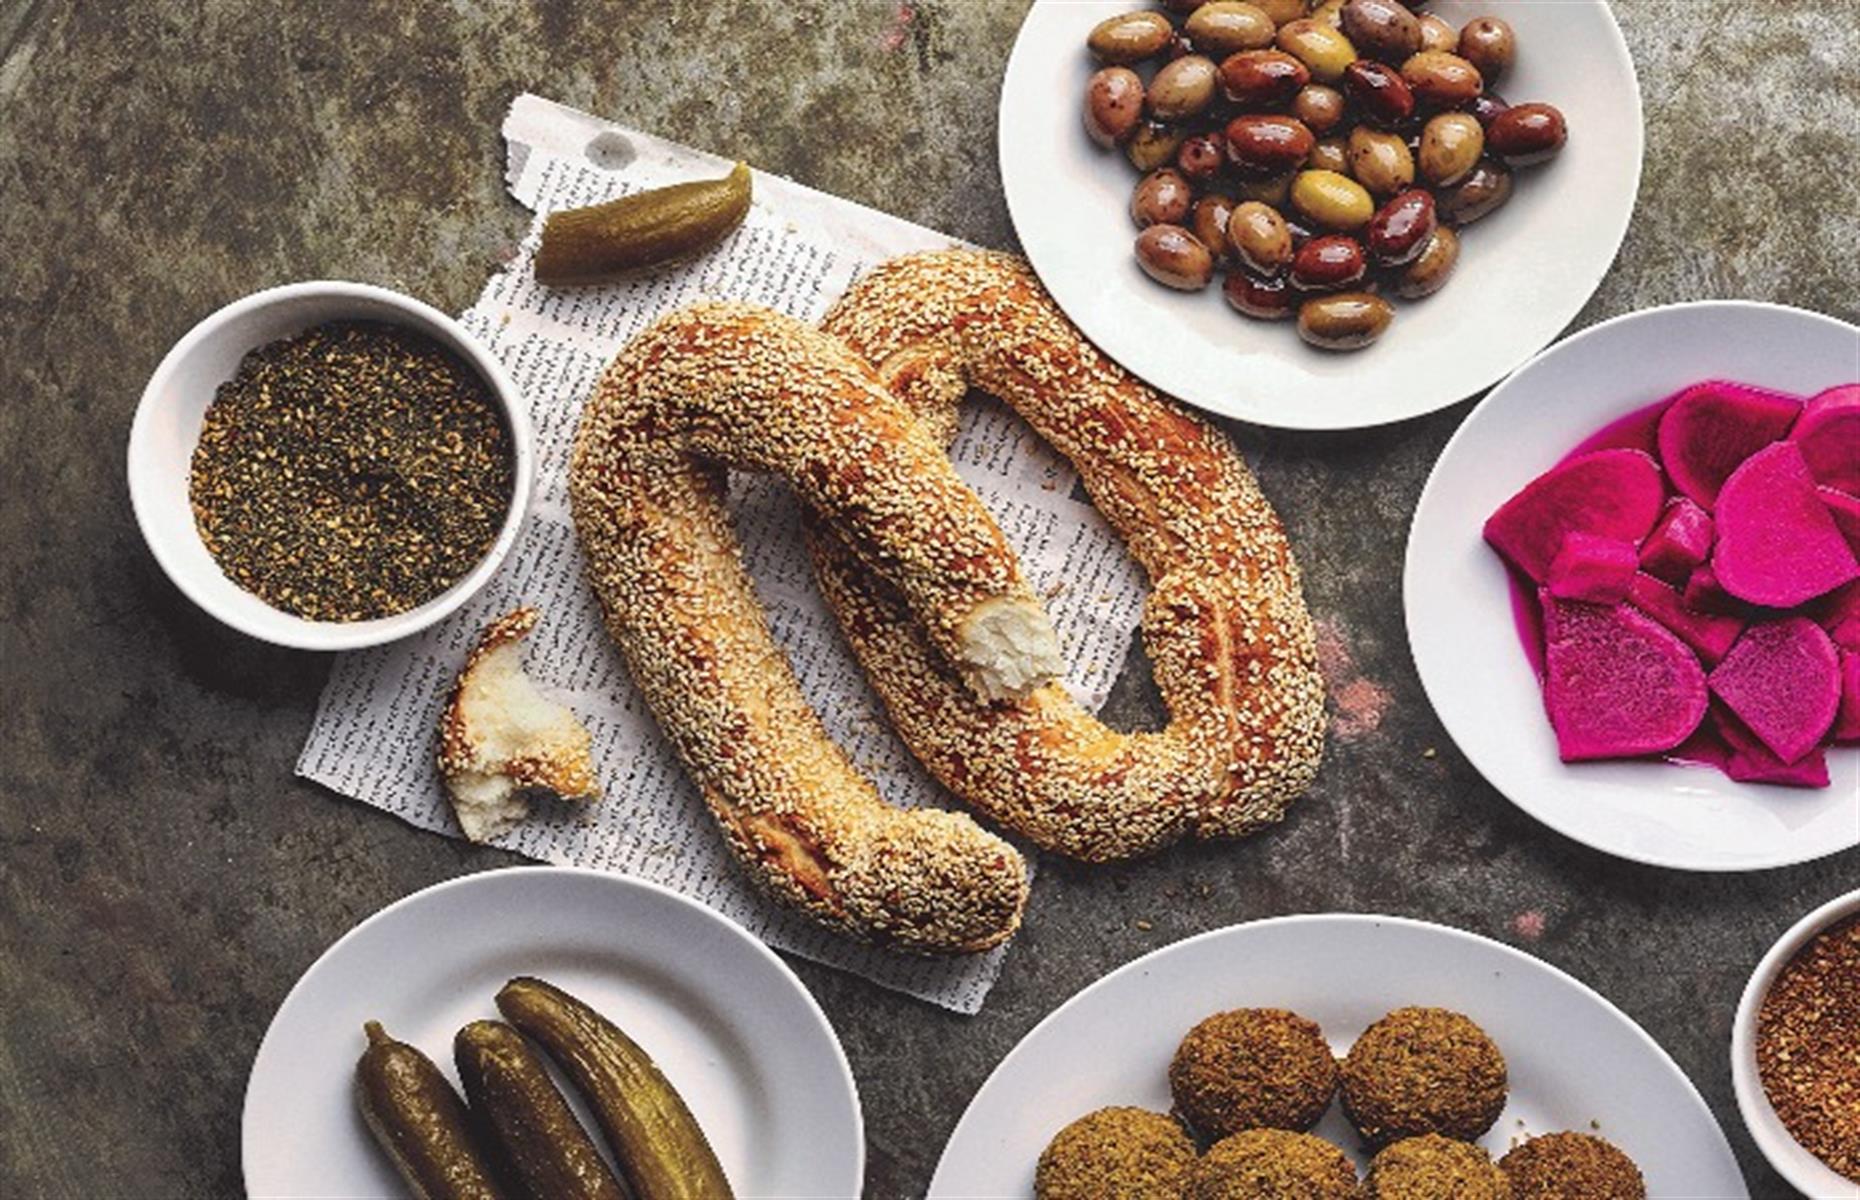 <p>A bagel with a difference, these oblong-shaped Palestinian breads are coated with a sticky, sesame seed glaze. They’re easy to make and, unlike classic New York–style bagels, don't require poaching in water. Serve as part of a mezze platter with pickles, dips, falafel, and olives, and pop any leftovers in the freezer.</p>  <p><a href="https://www.lovefood.com/recipes/71600/sesame-bagels-recipe"><strong>Get the recipe for sesame bagels here</strong></a></p>